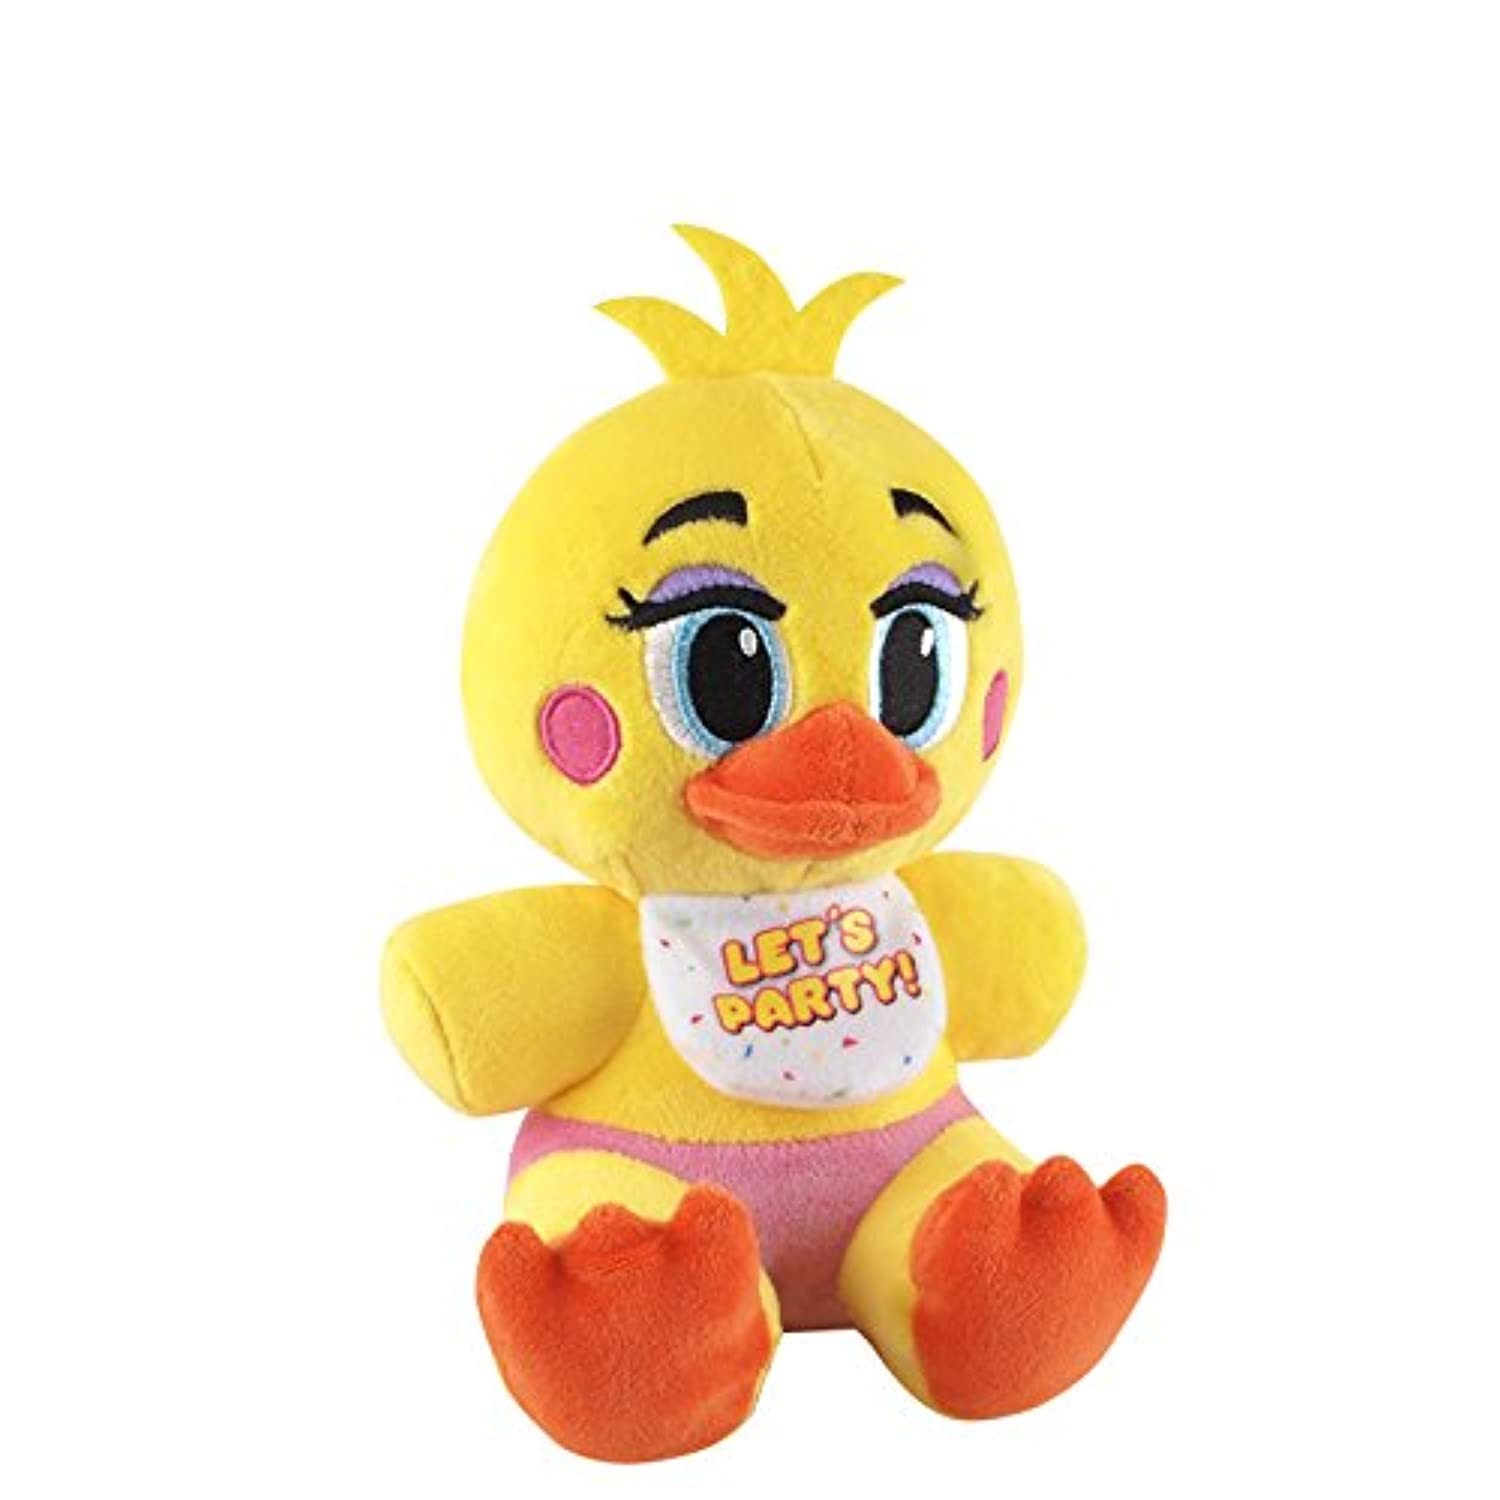 Funko Five Nights at Freddy's Toy Chica Plush,Yellow, 6